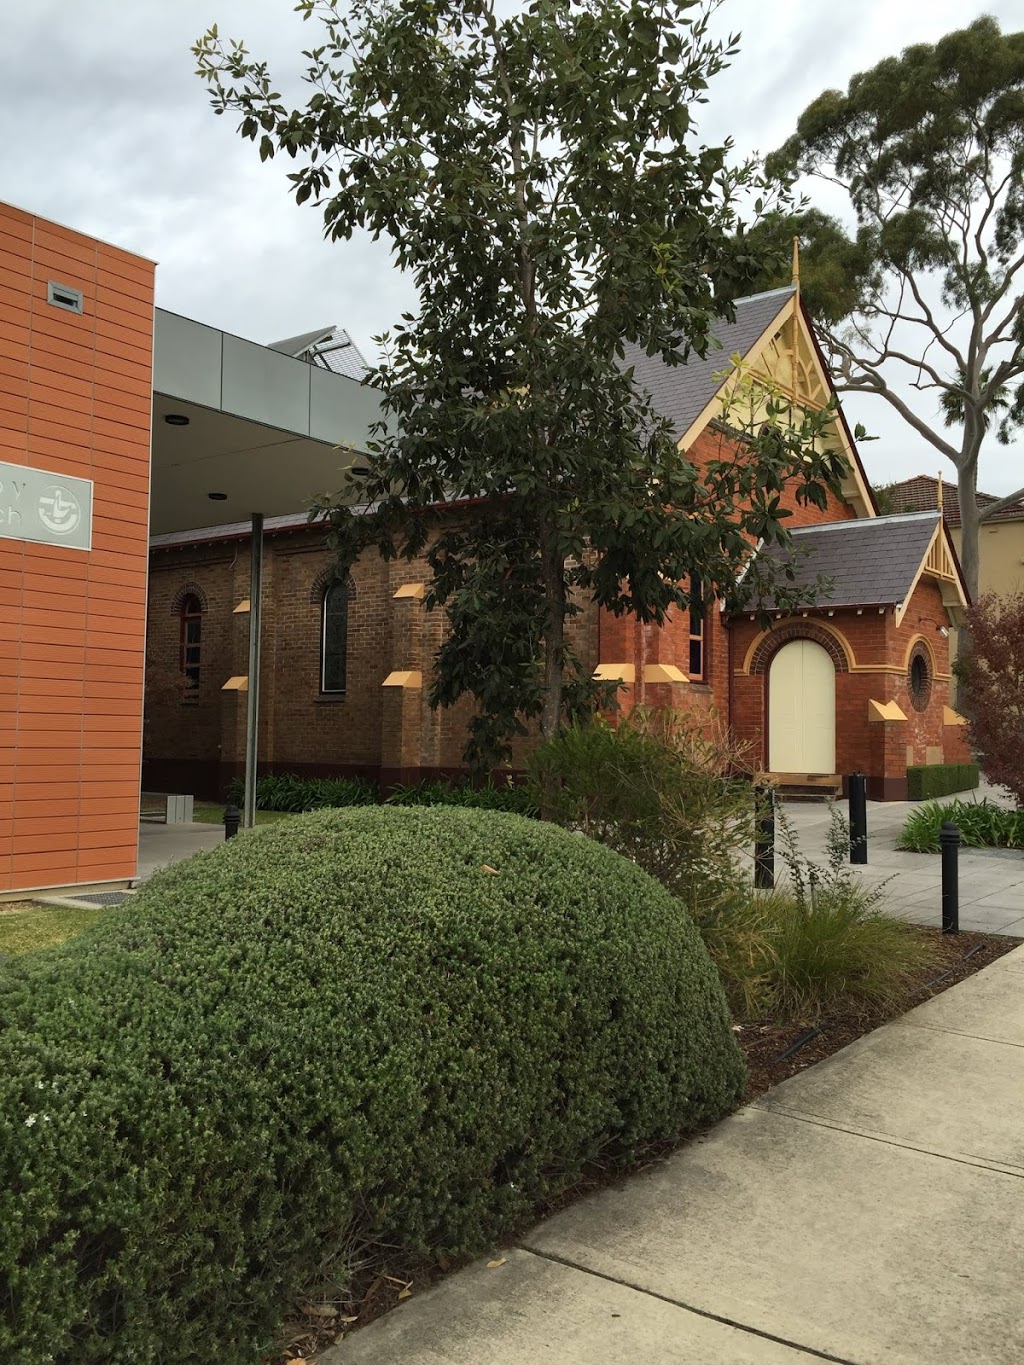 Willoughby Uniting Church | church | 10/12 Clanwilliam St, North Willoughby NSW 2068, Australia | 0294152100 OR +61 2 9415 2100